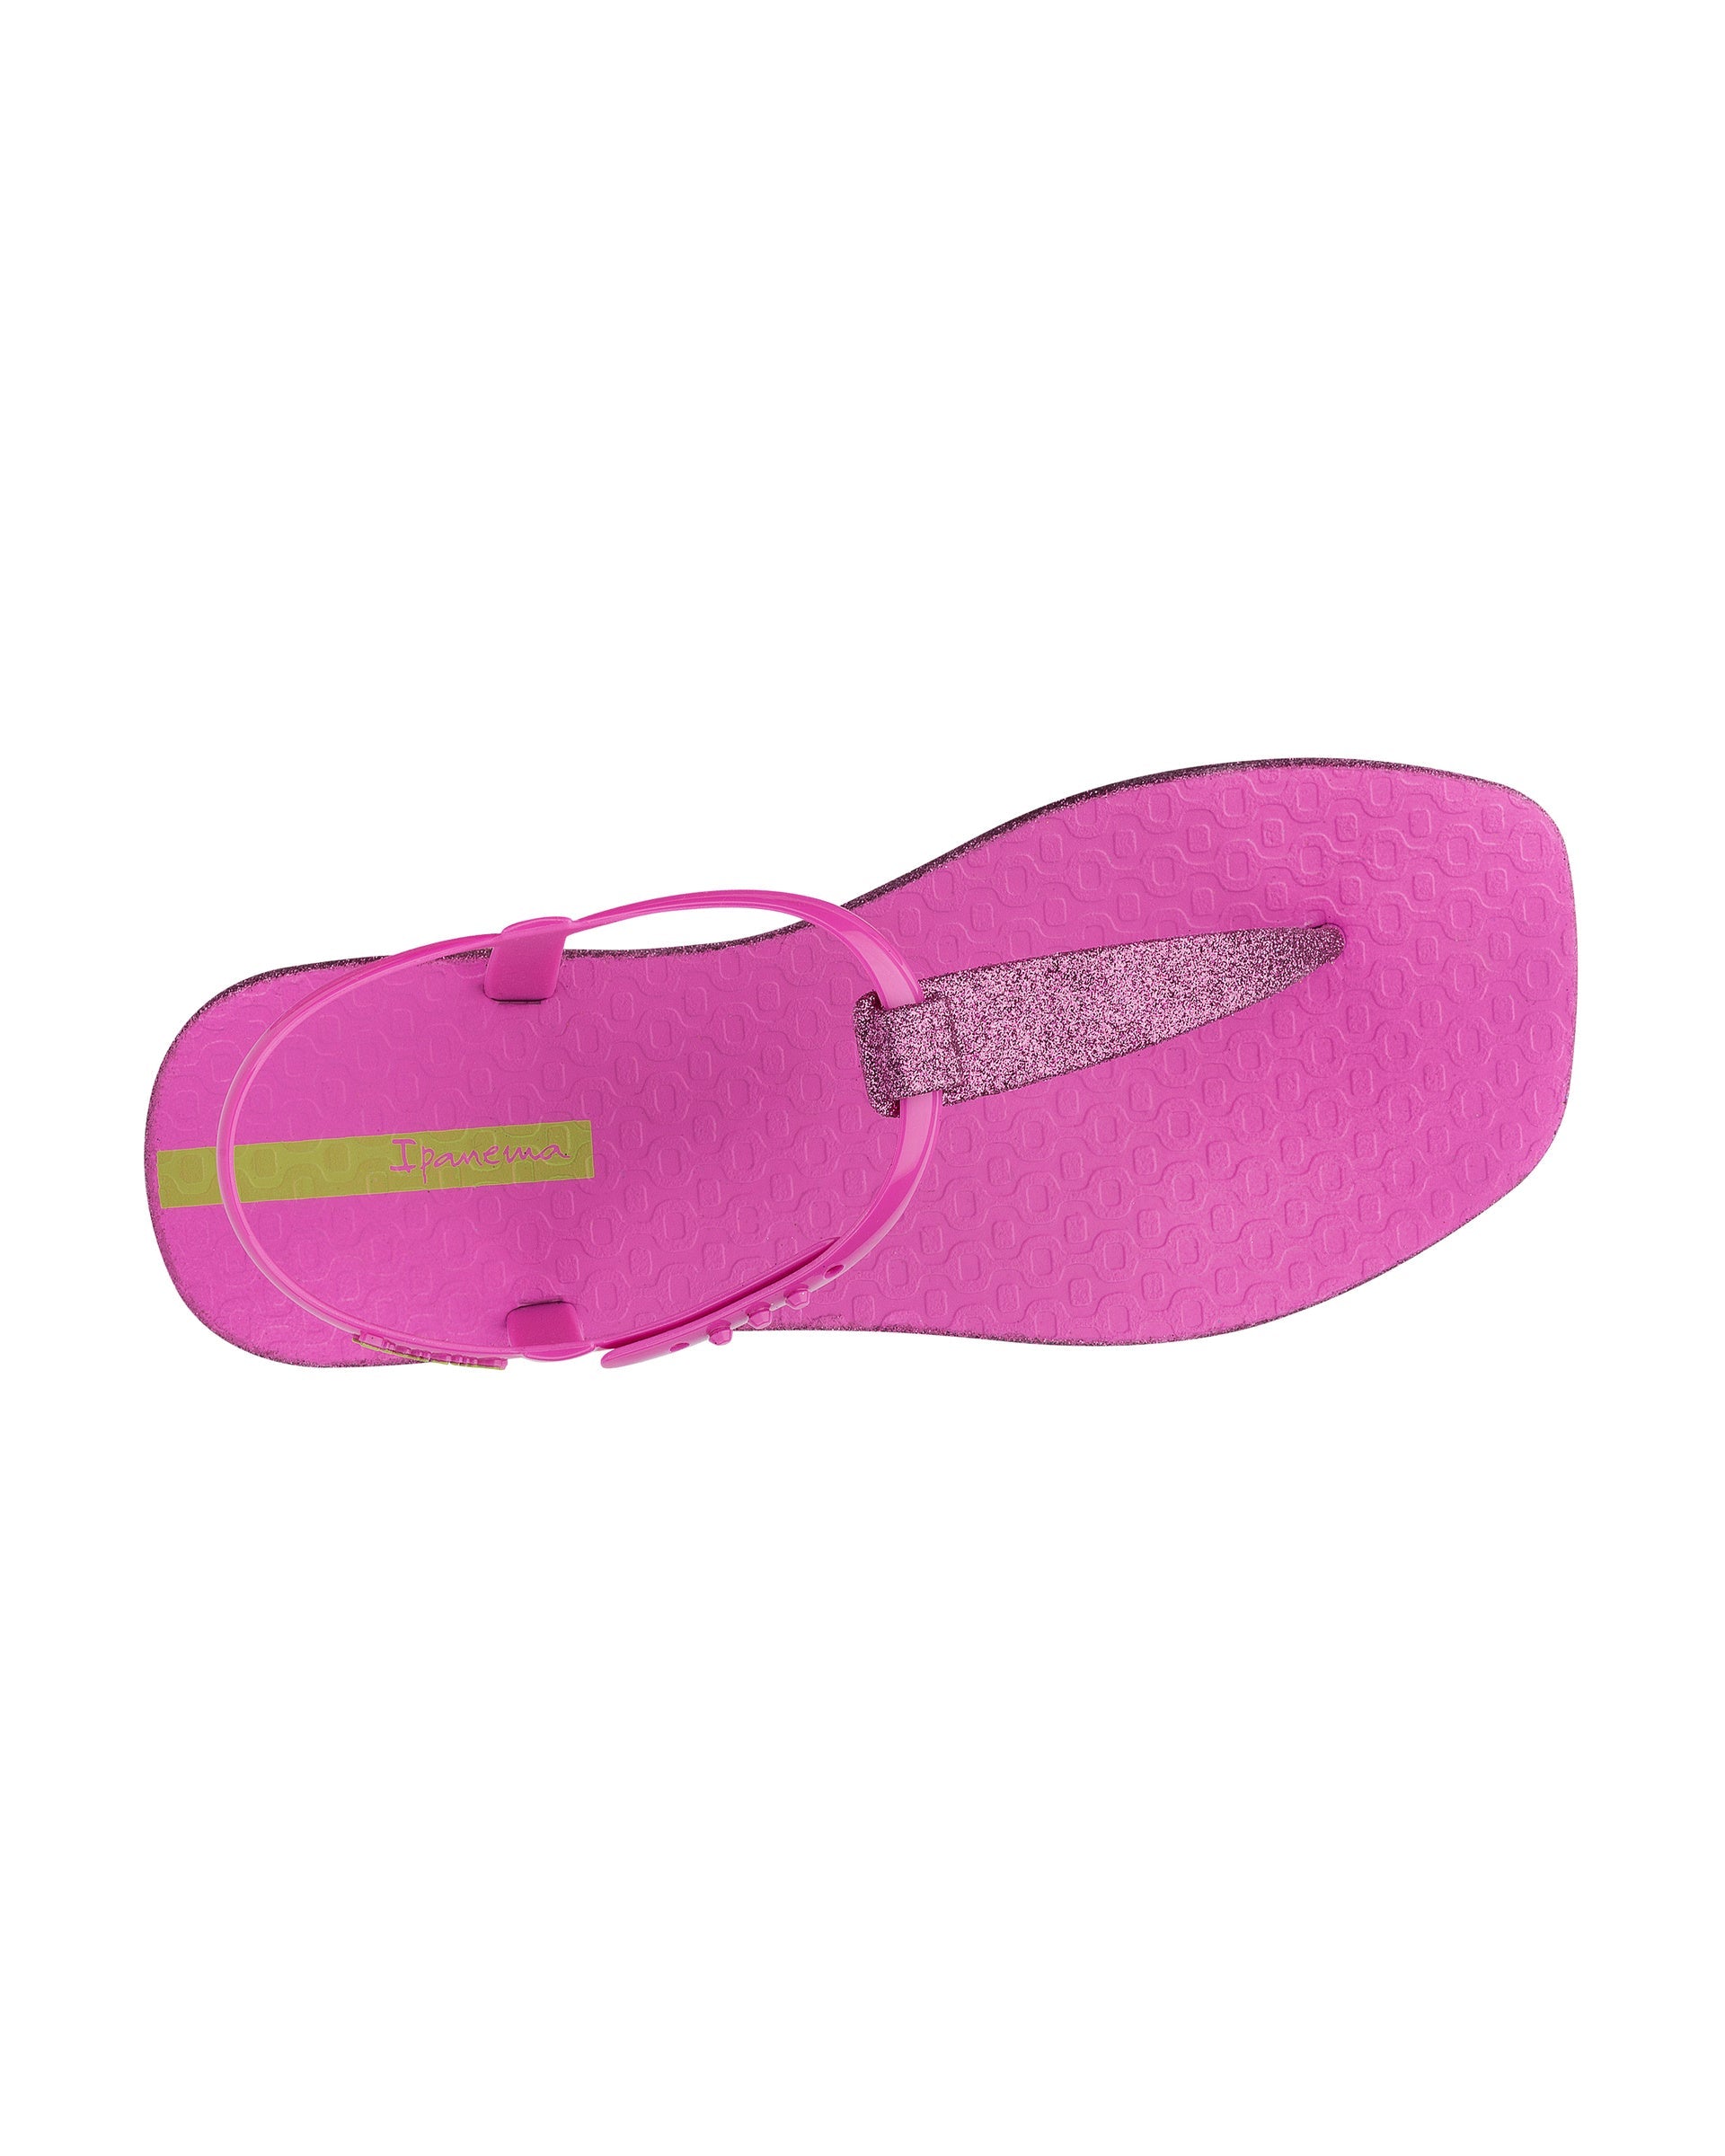 Top view of a pink Ipanema Class Edge Glow t-strap women's sandal with glitter pink thong.